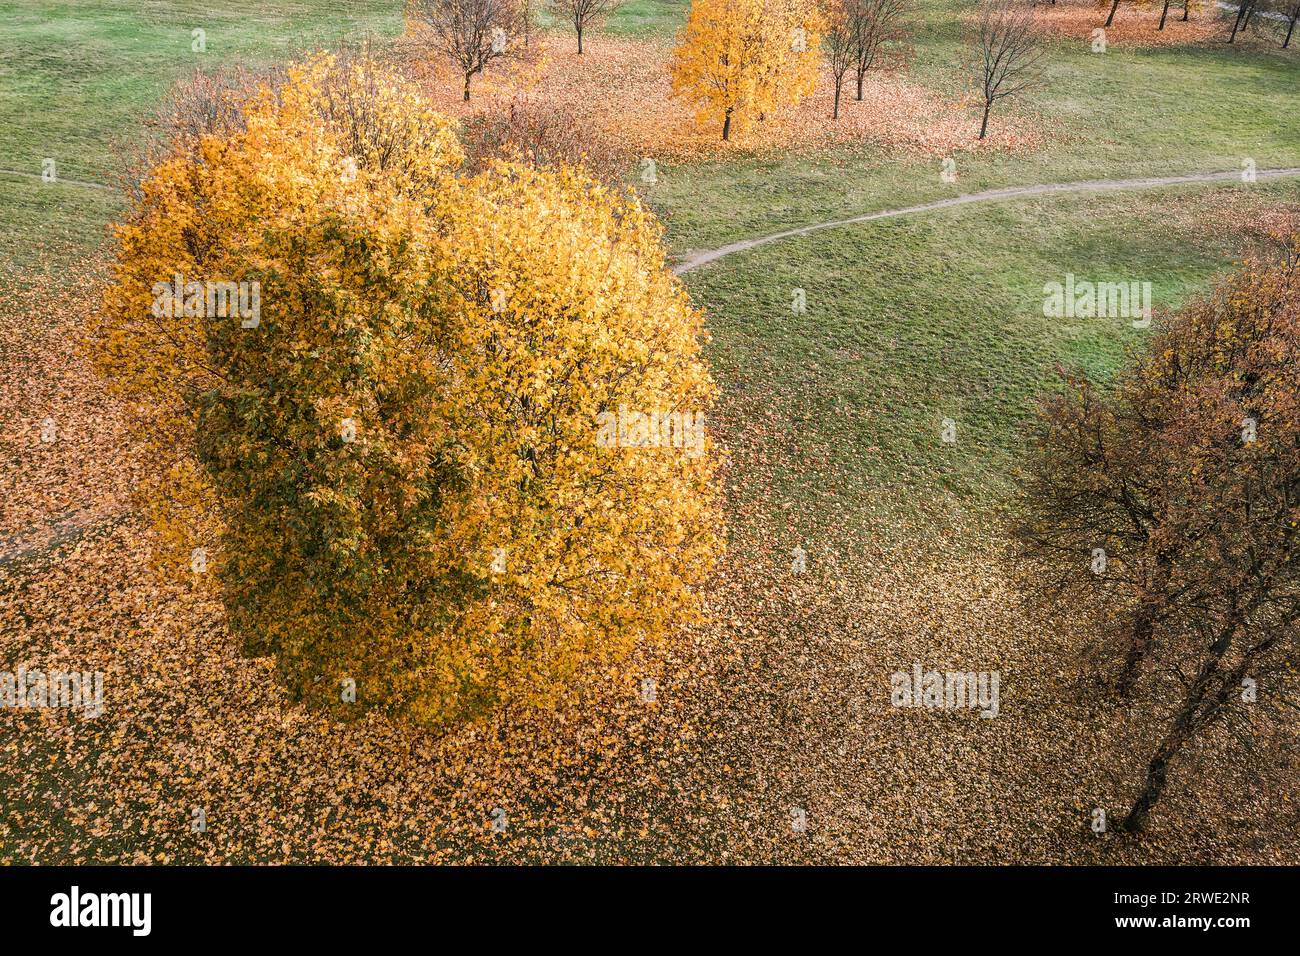 autumn park landscape with vibrant yellow tree and fallen leaves on ground. Stock Photo